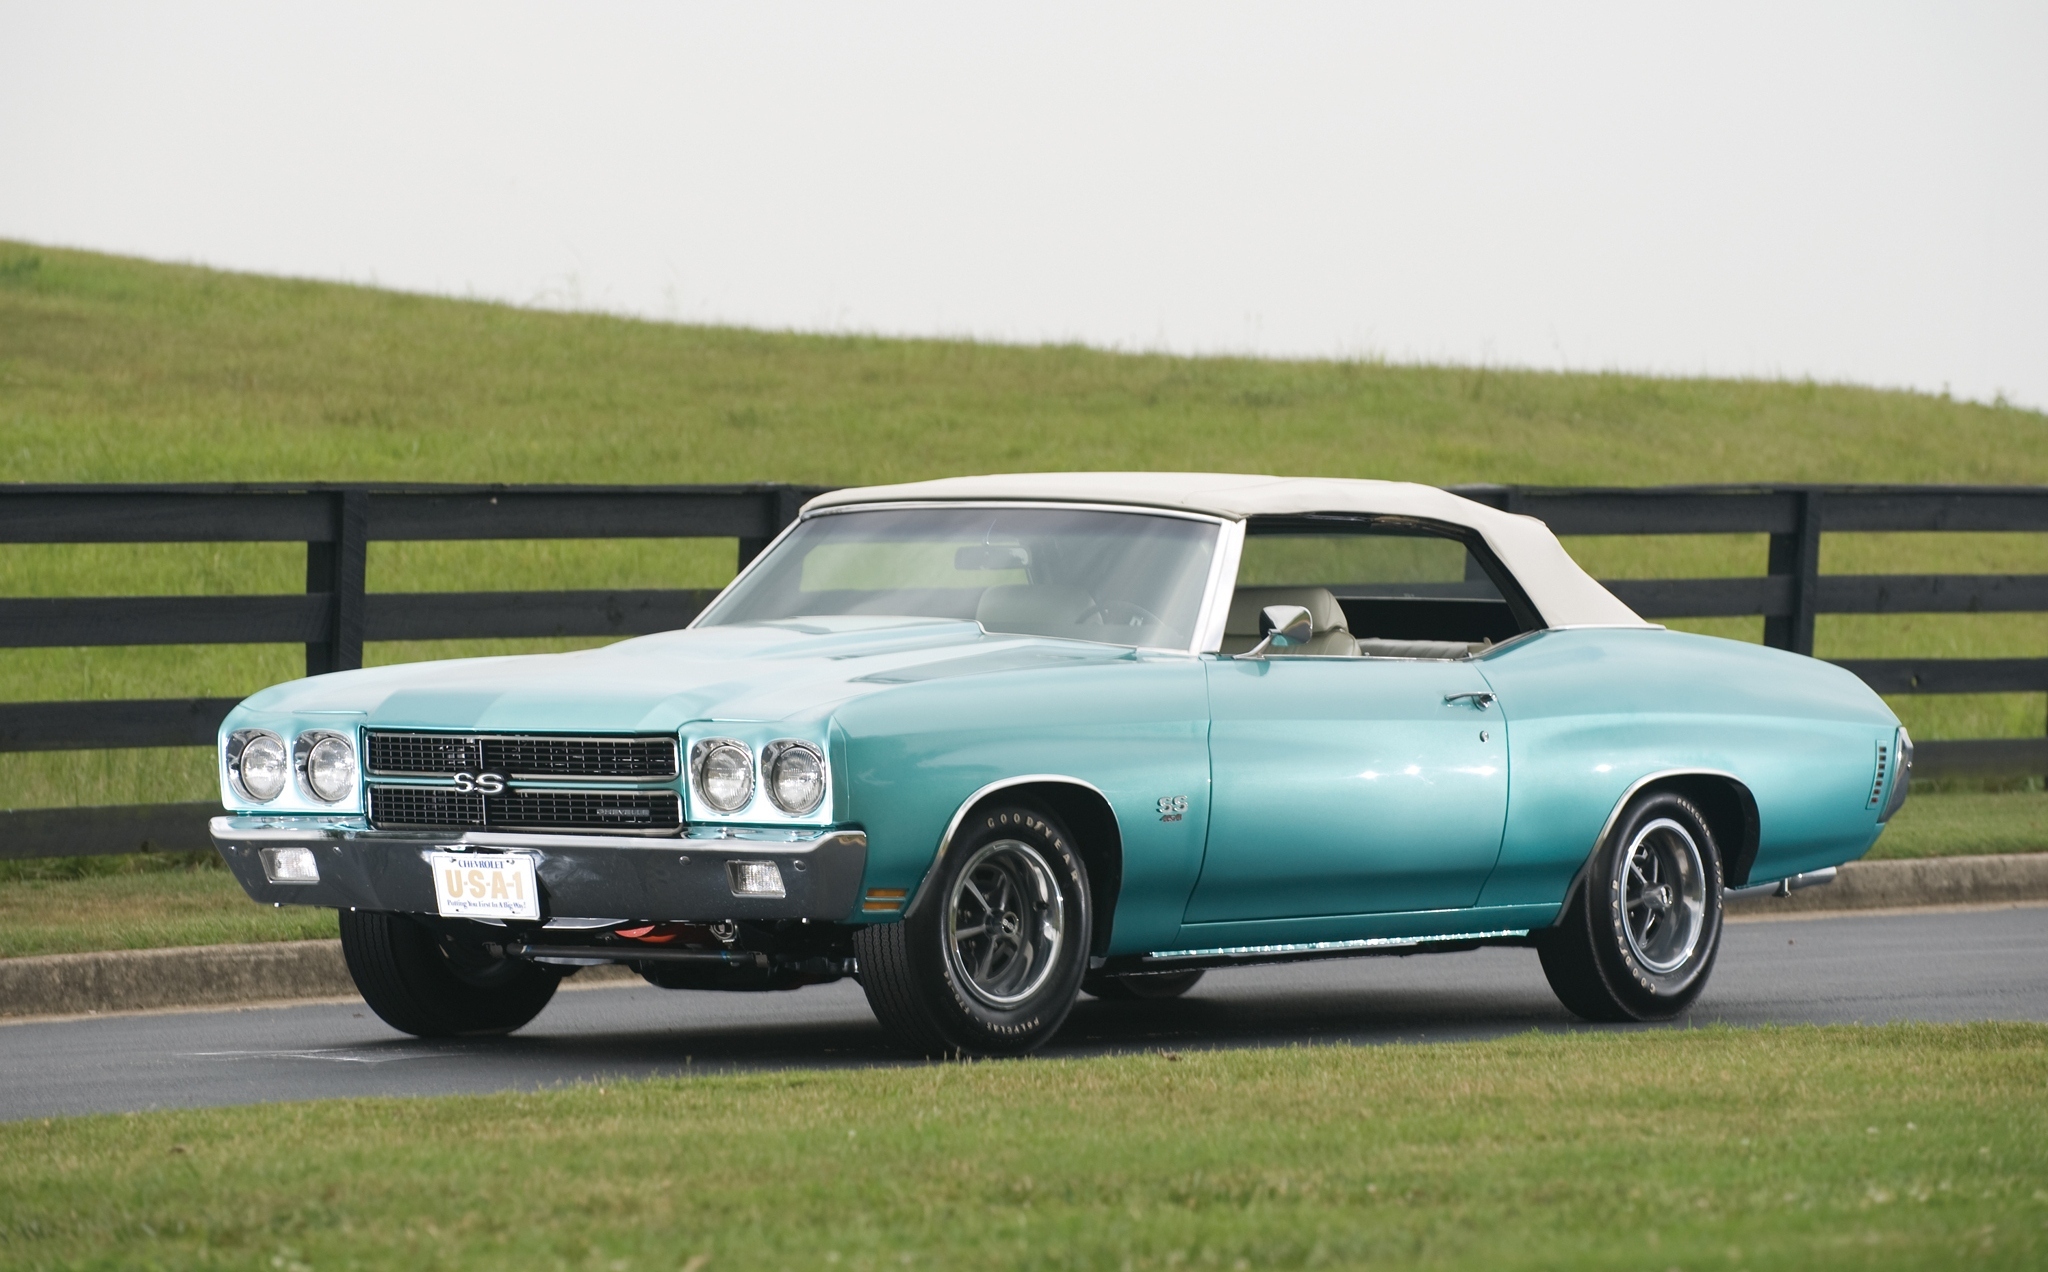 cars, chevrolet, side view, 1970, chevelle